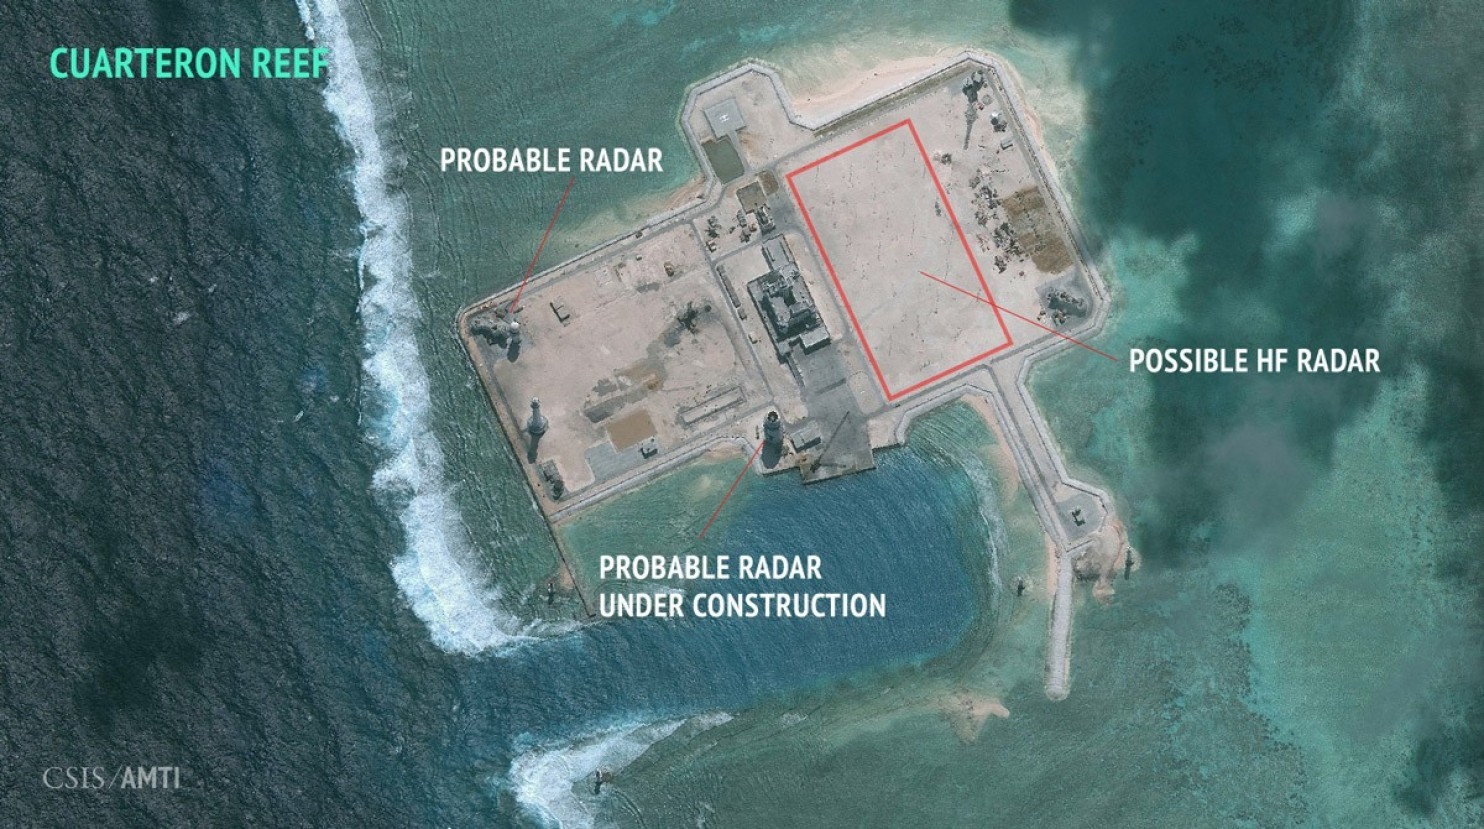 Is China building a high-tech radar system on a disputed South China Sea isle?